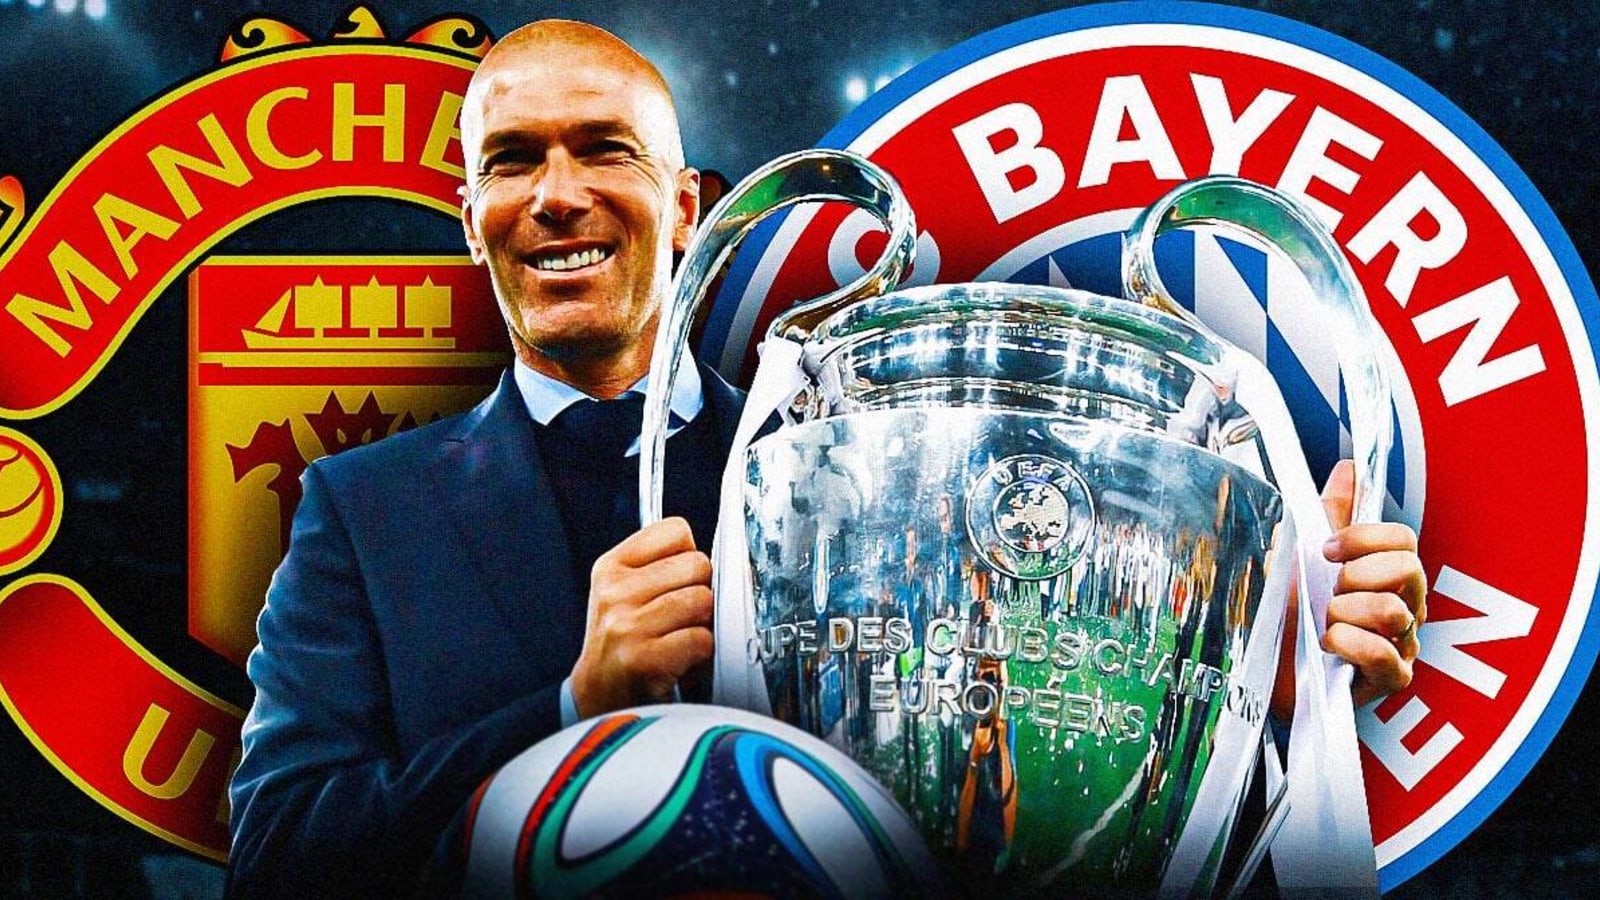 Manchester United rumors: Zinedine Zidane gives preference between Red Devils and Bayern Munich